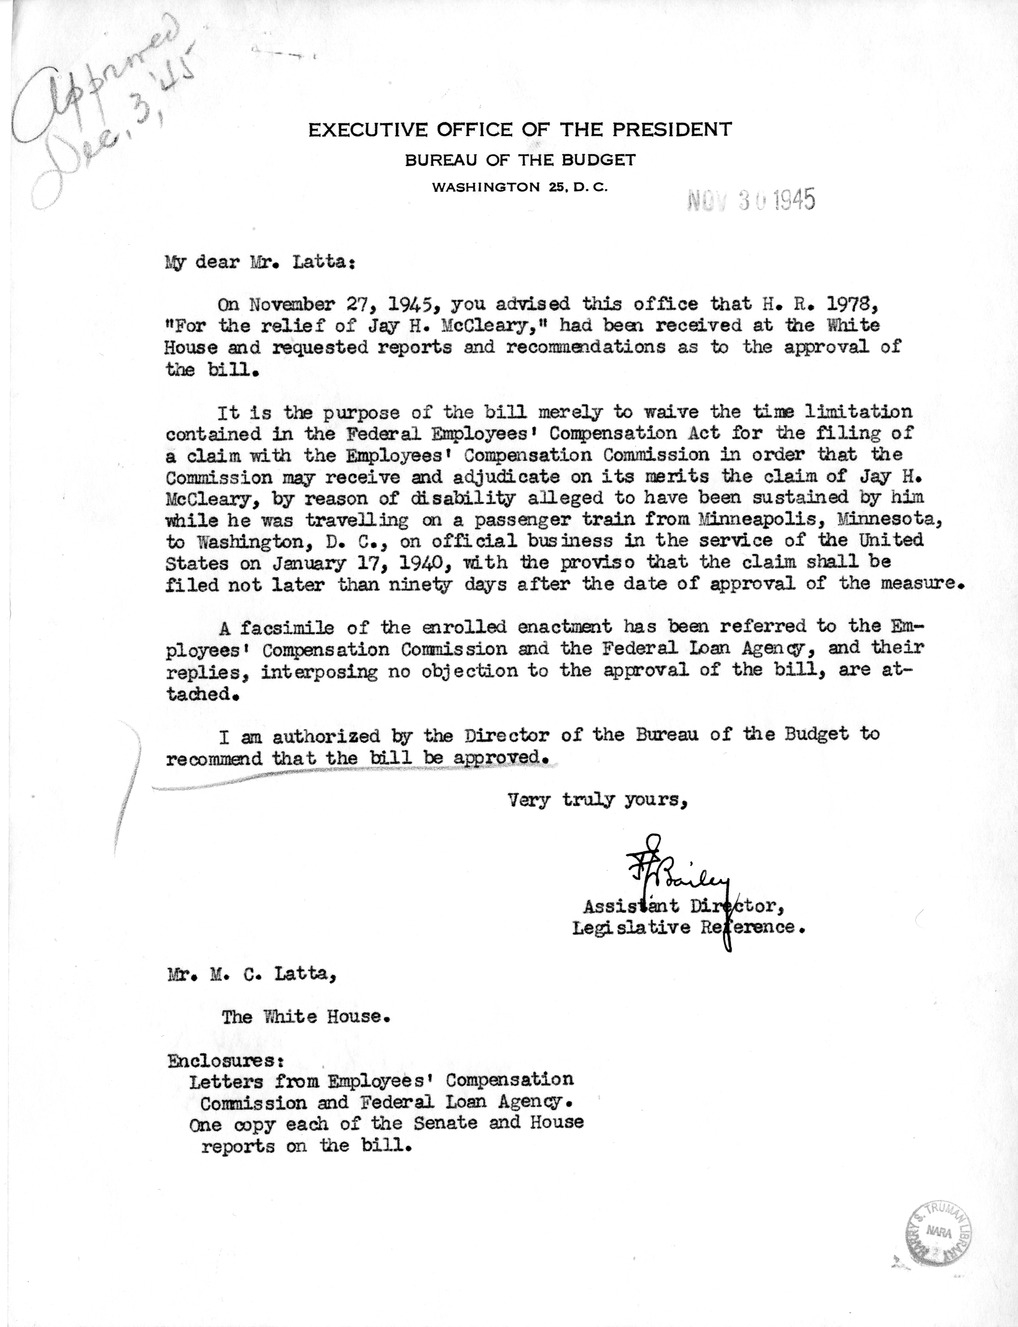 Memorandum from Frederick J. Bailey to M. C. Latta, H.R. 1978, For the Relief of Jay H. McCleary, with Attachments